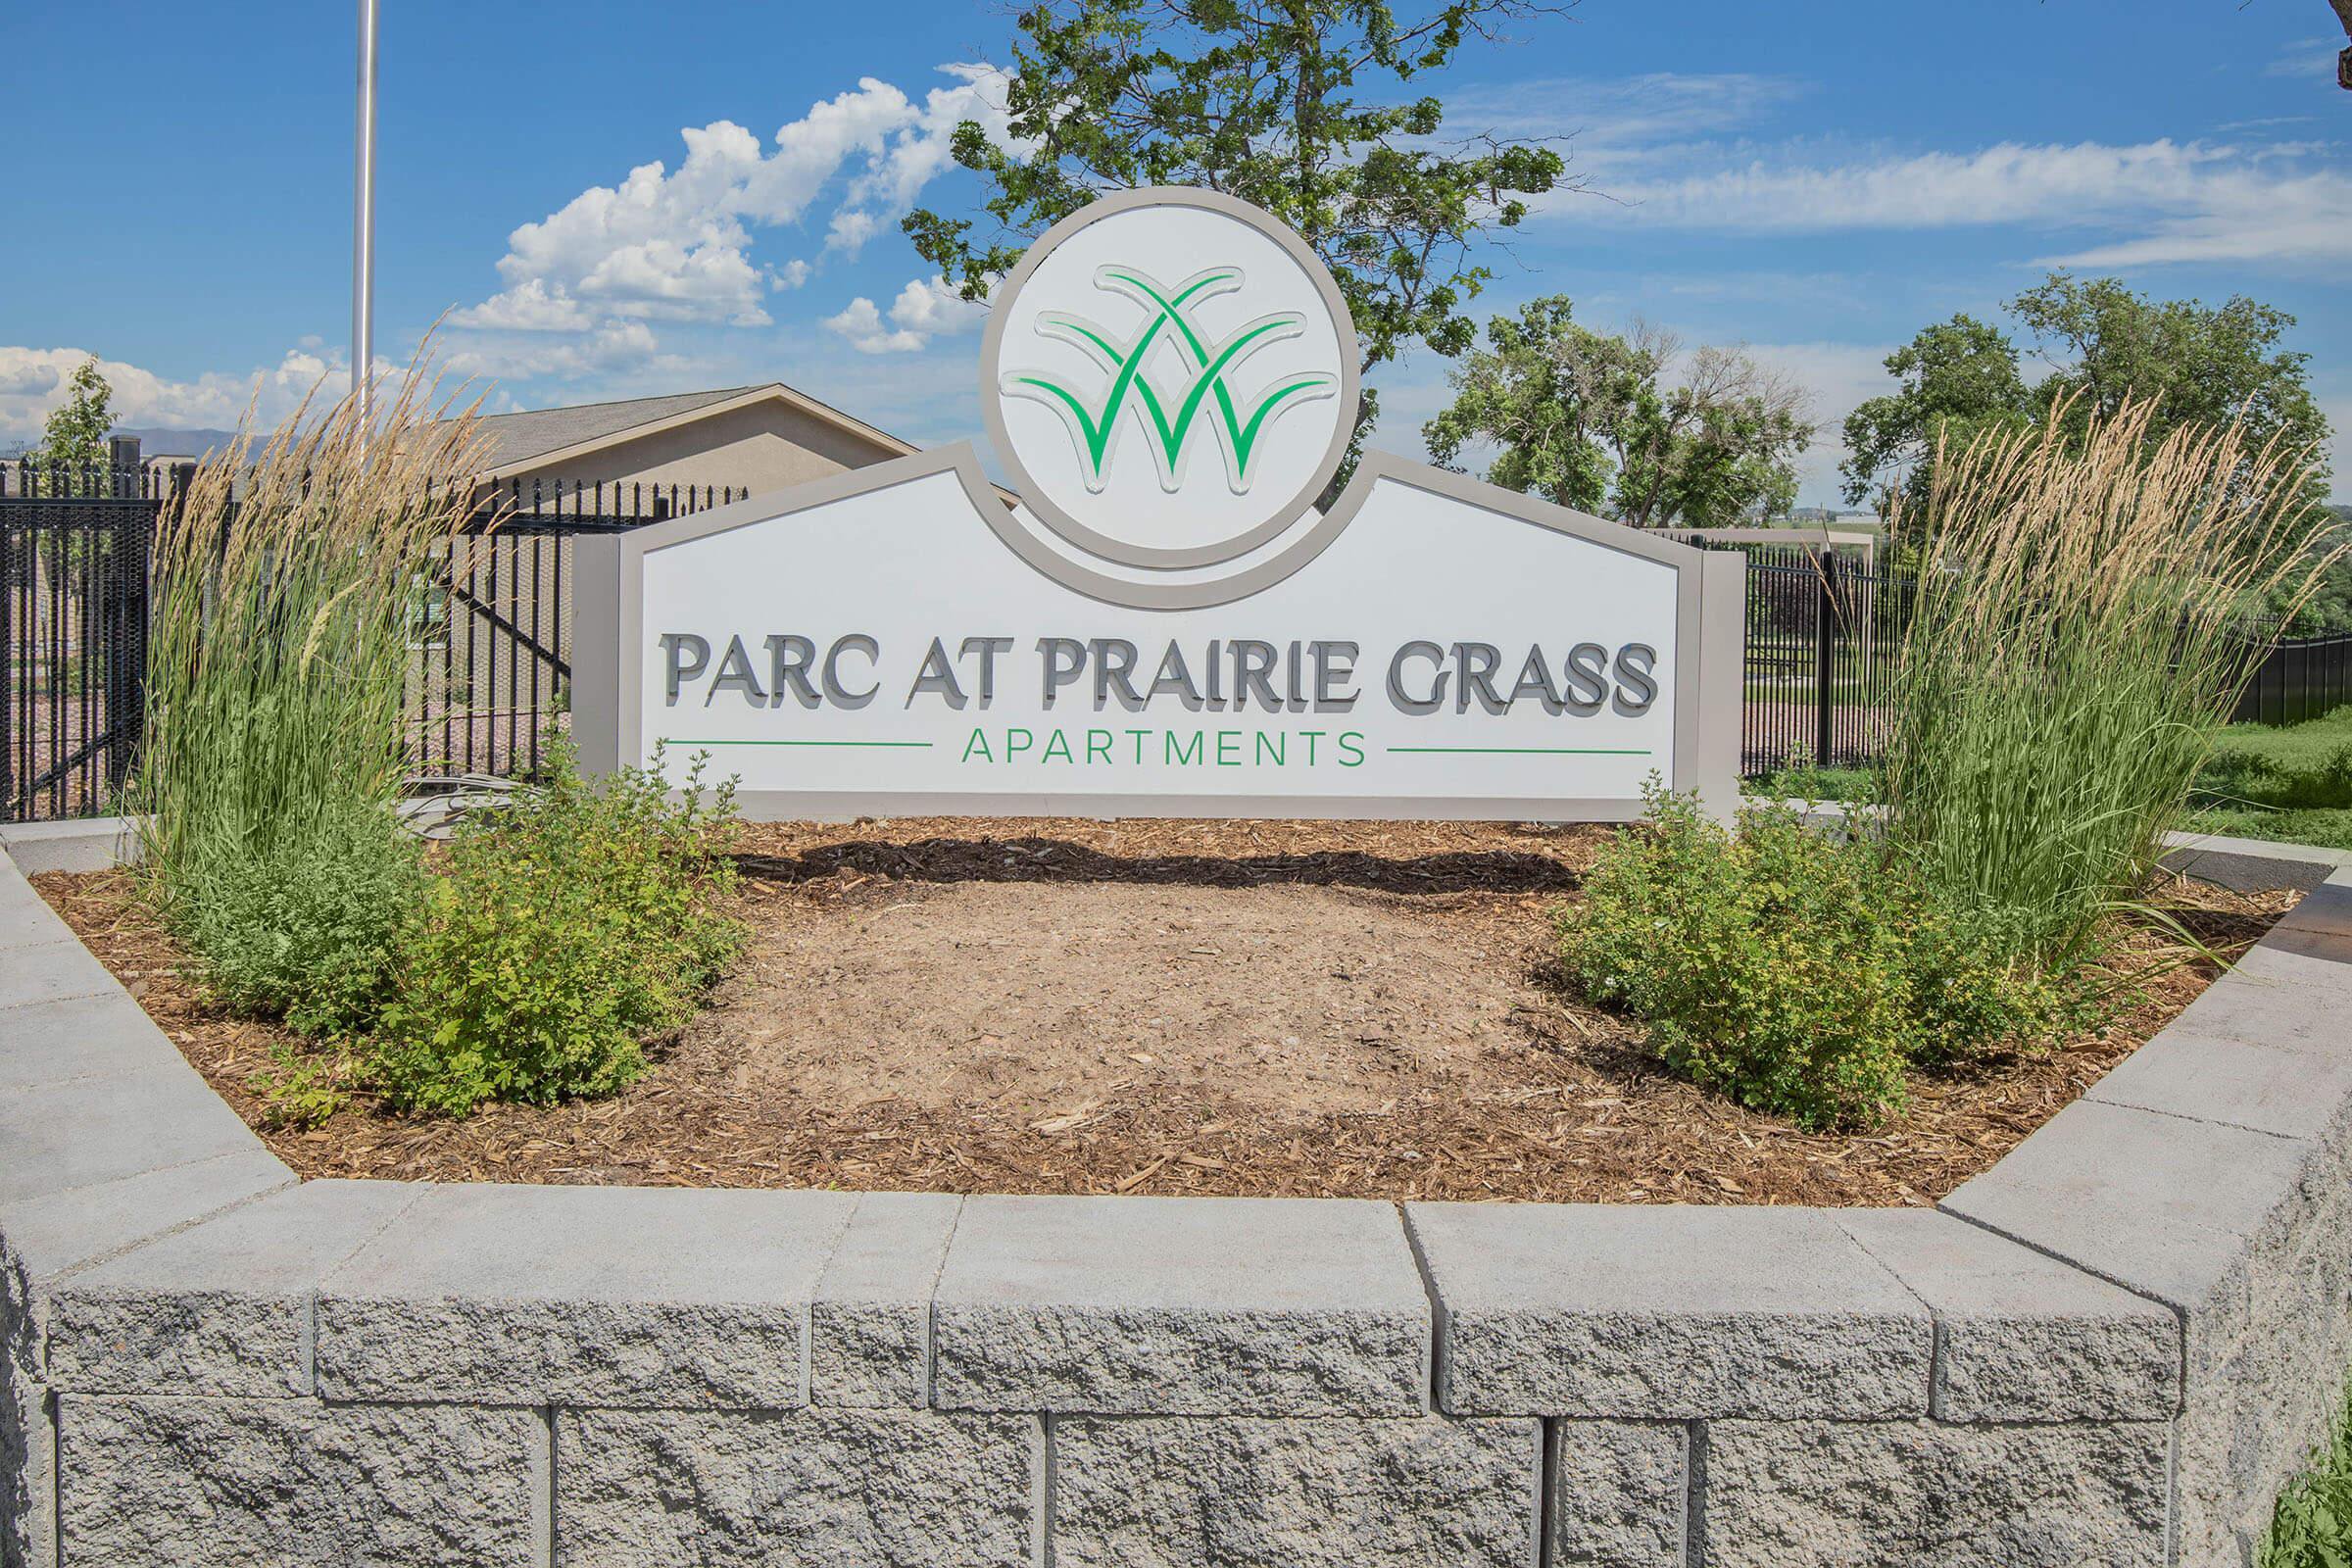 Signage for Parc at Prairie Grass, located in Colorado Springs, CO